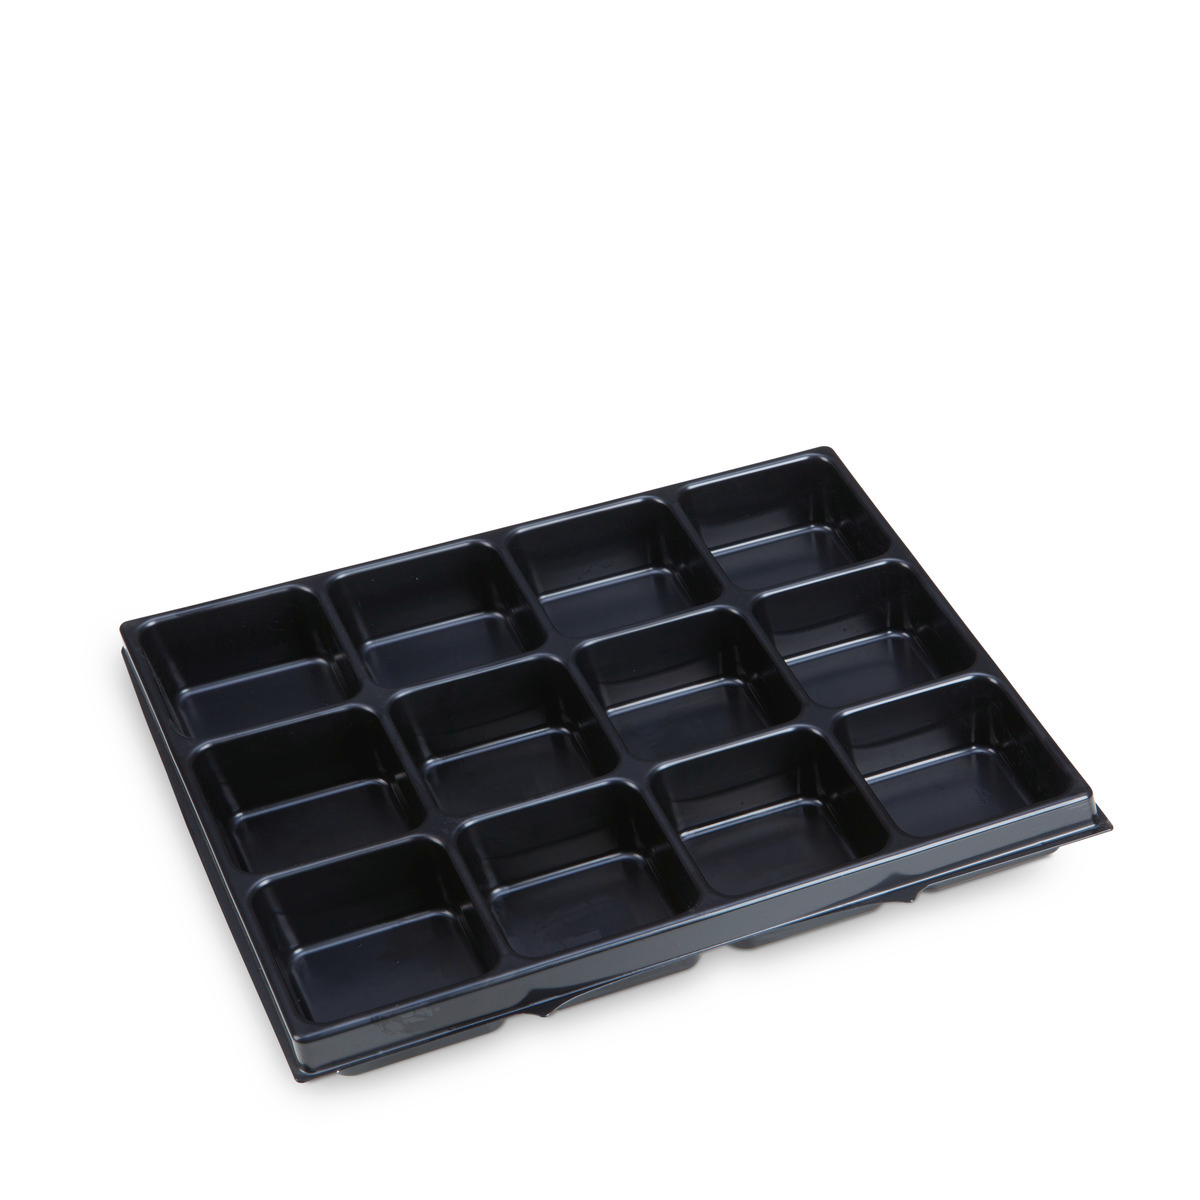 Small Component Tray With 12 recesses